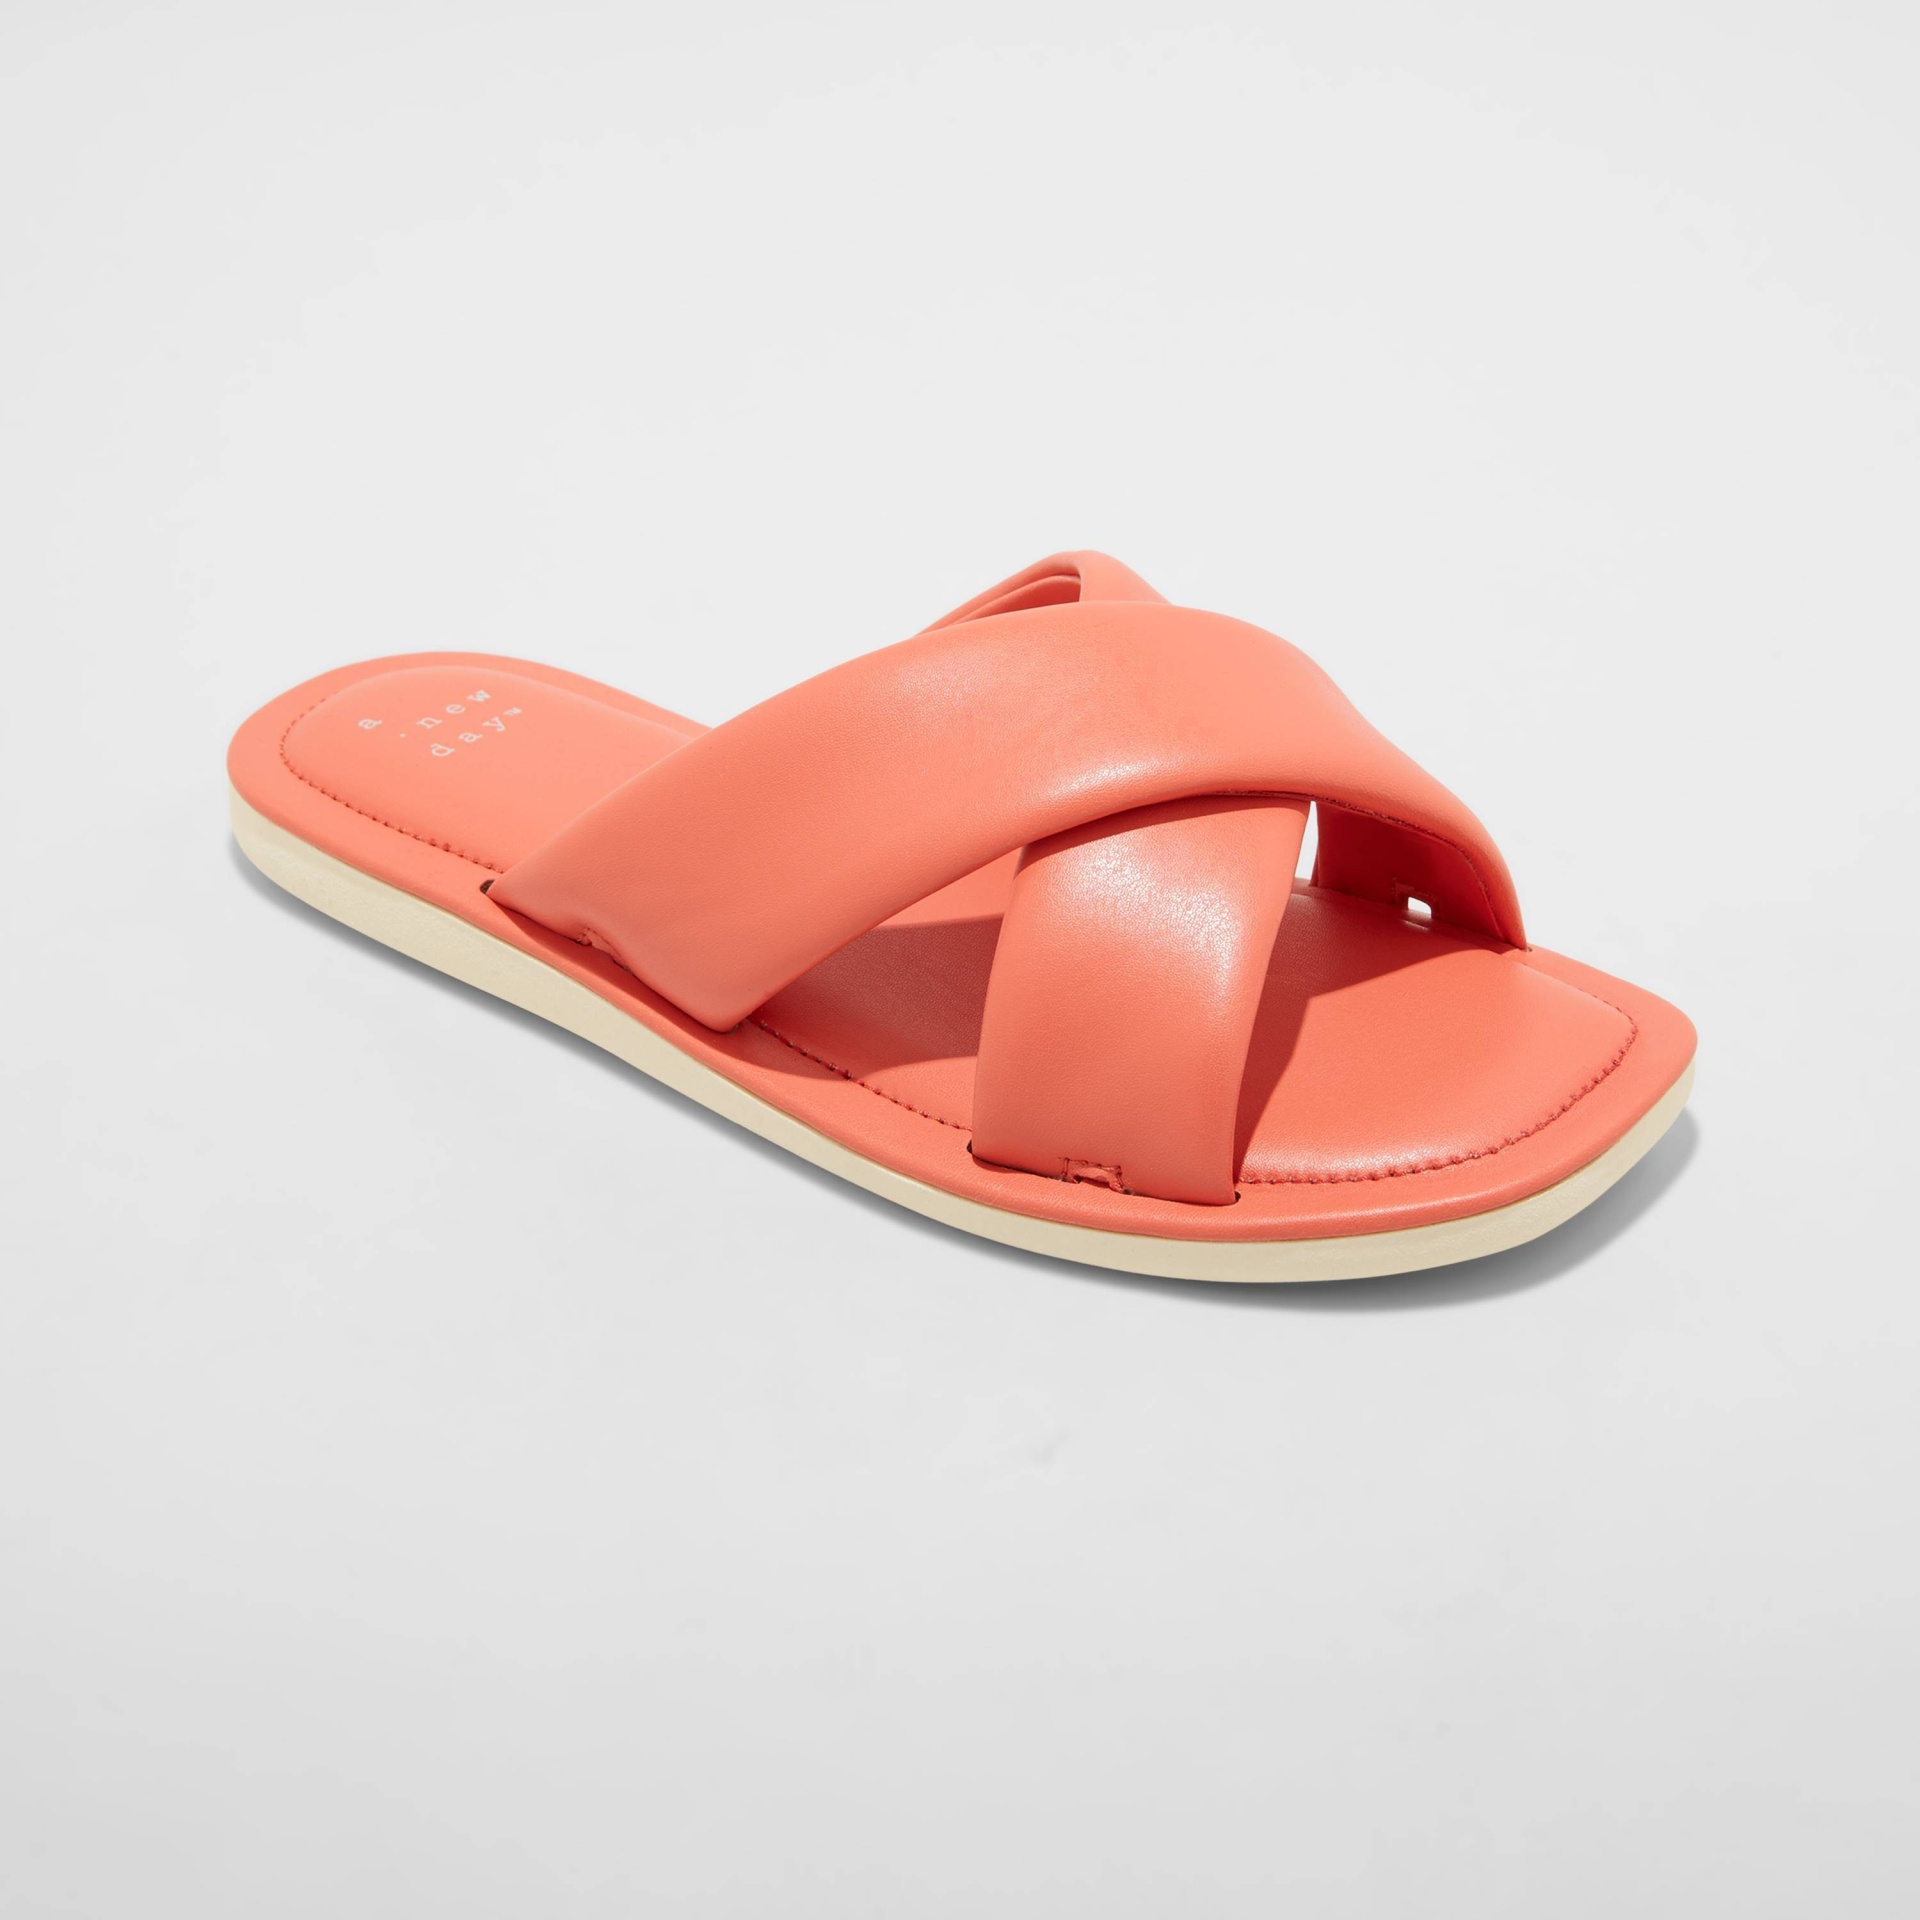 slide 1 of 1, Women's Daisy Crossband Slide Sandals - A New Day Coral 9.5, 1 ct